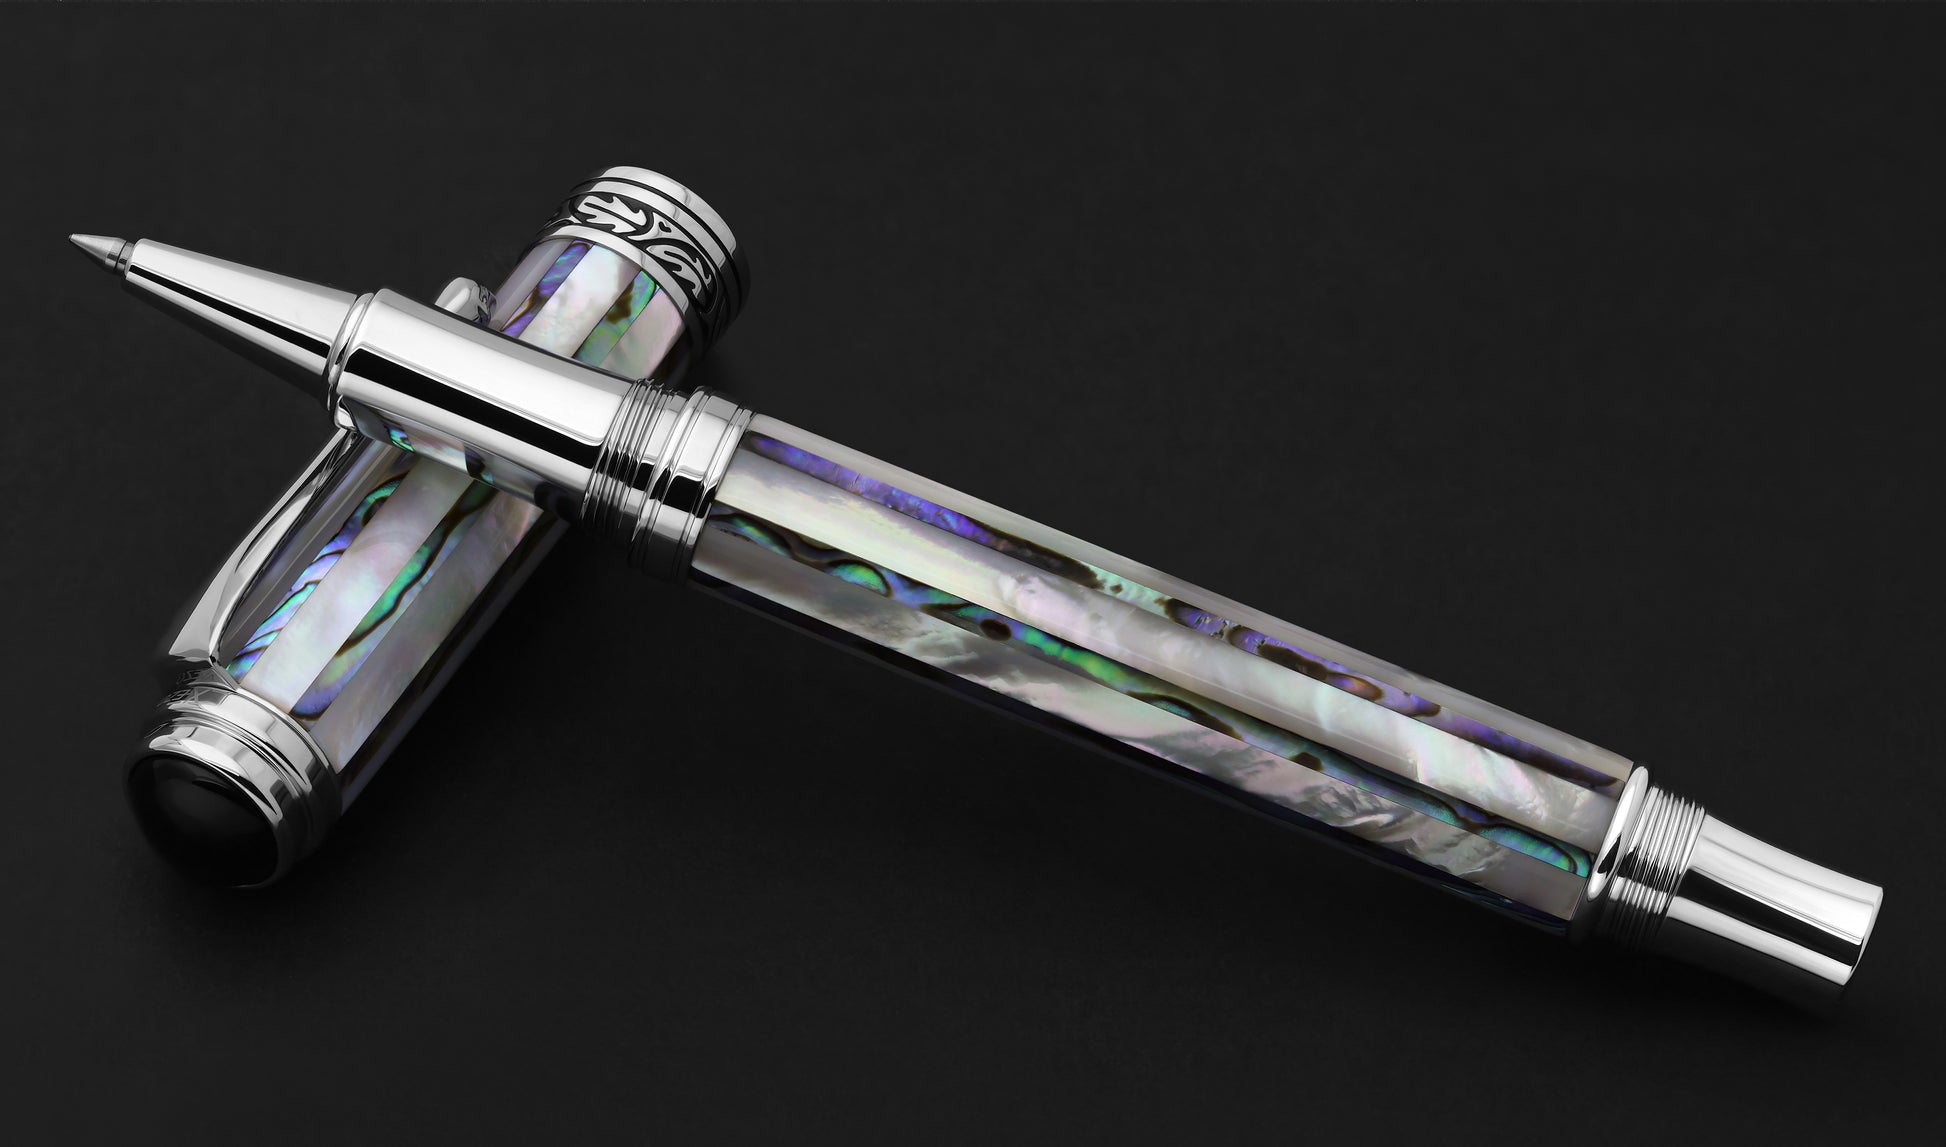 Maestro Jubilee mother-of-pearl Abalone rollerball pen uncaped laid down horizontally